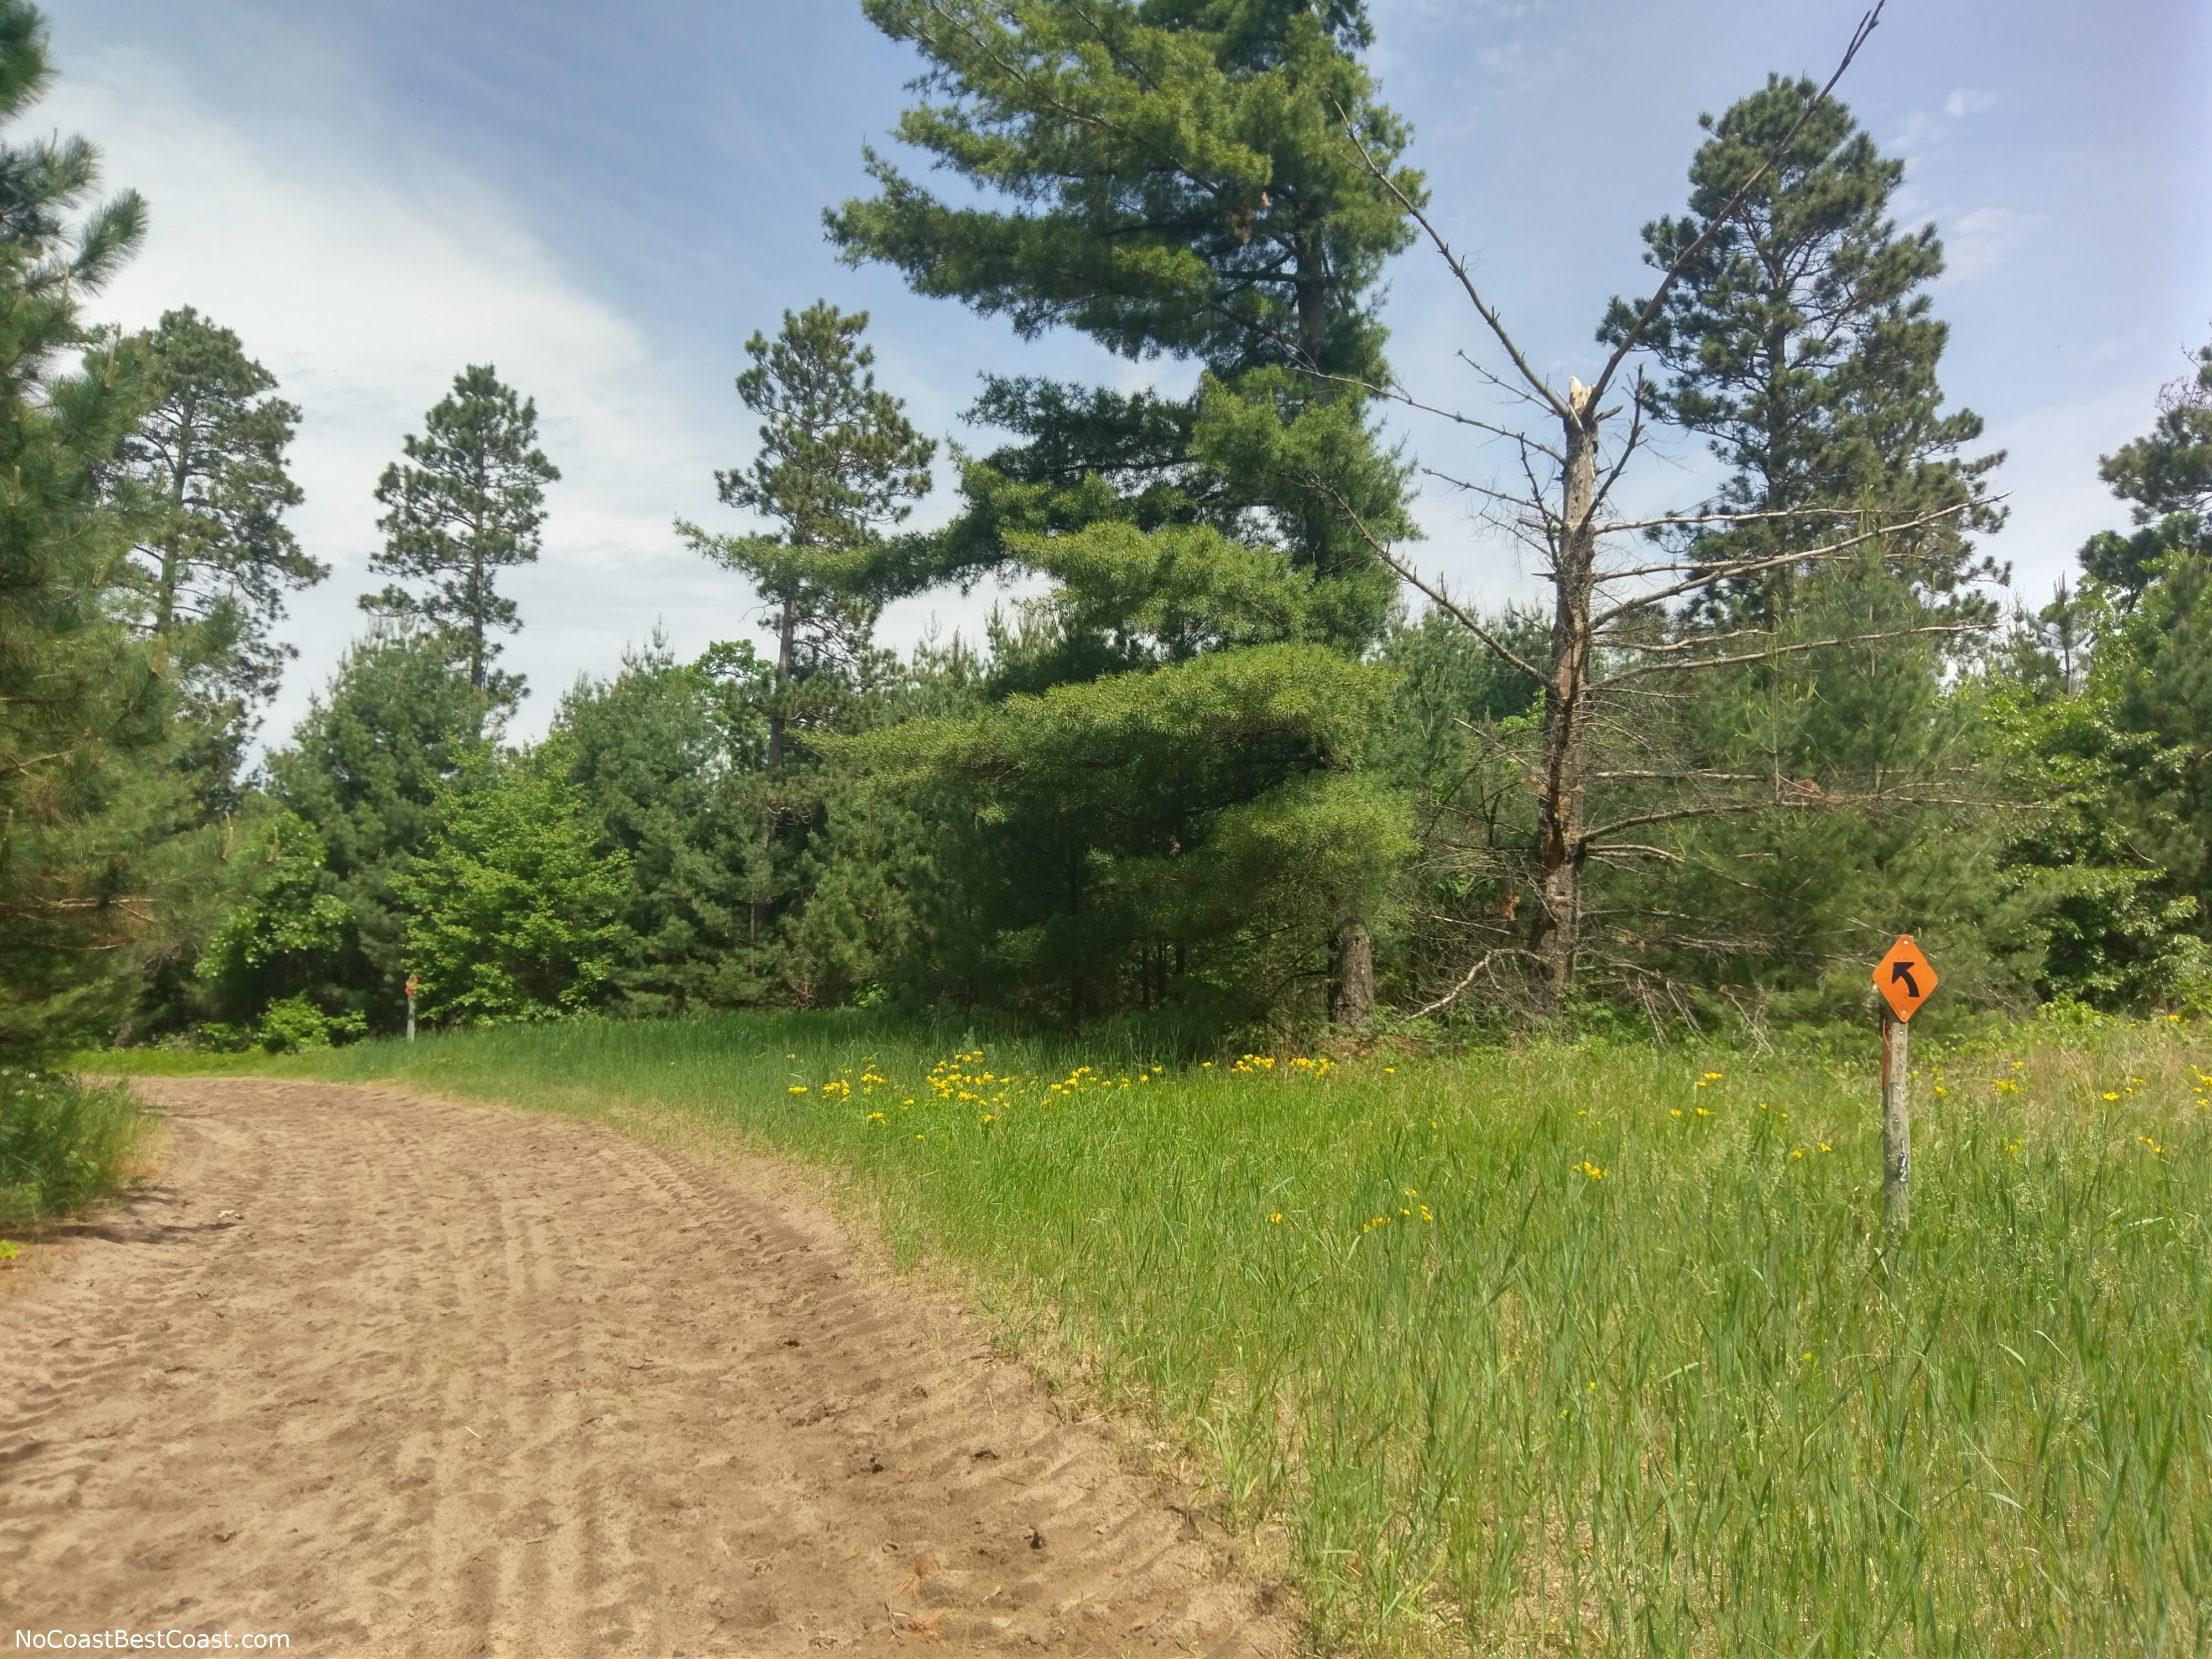 The sandy trail and pine forest of Uncas Dunes